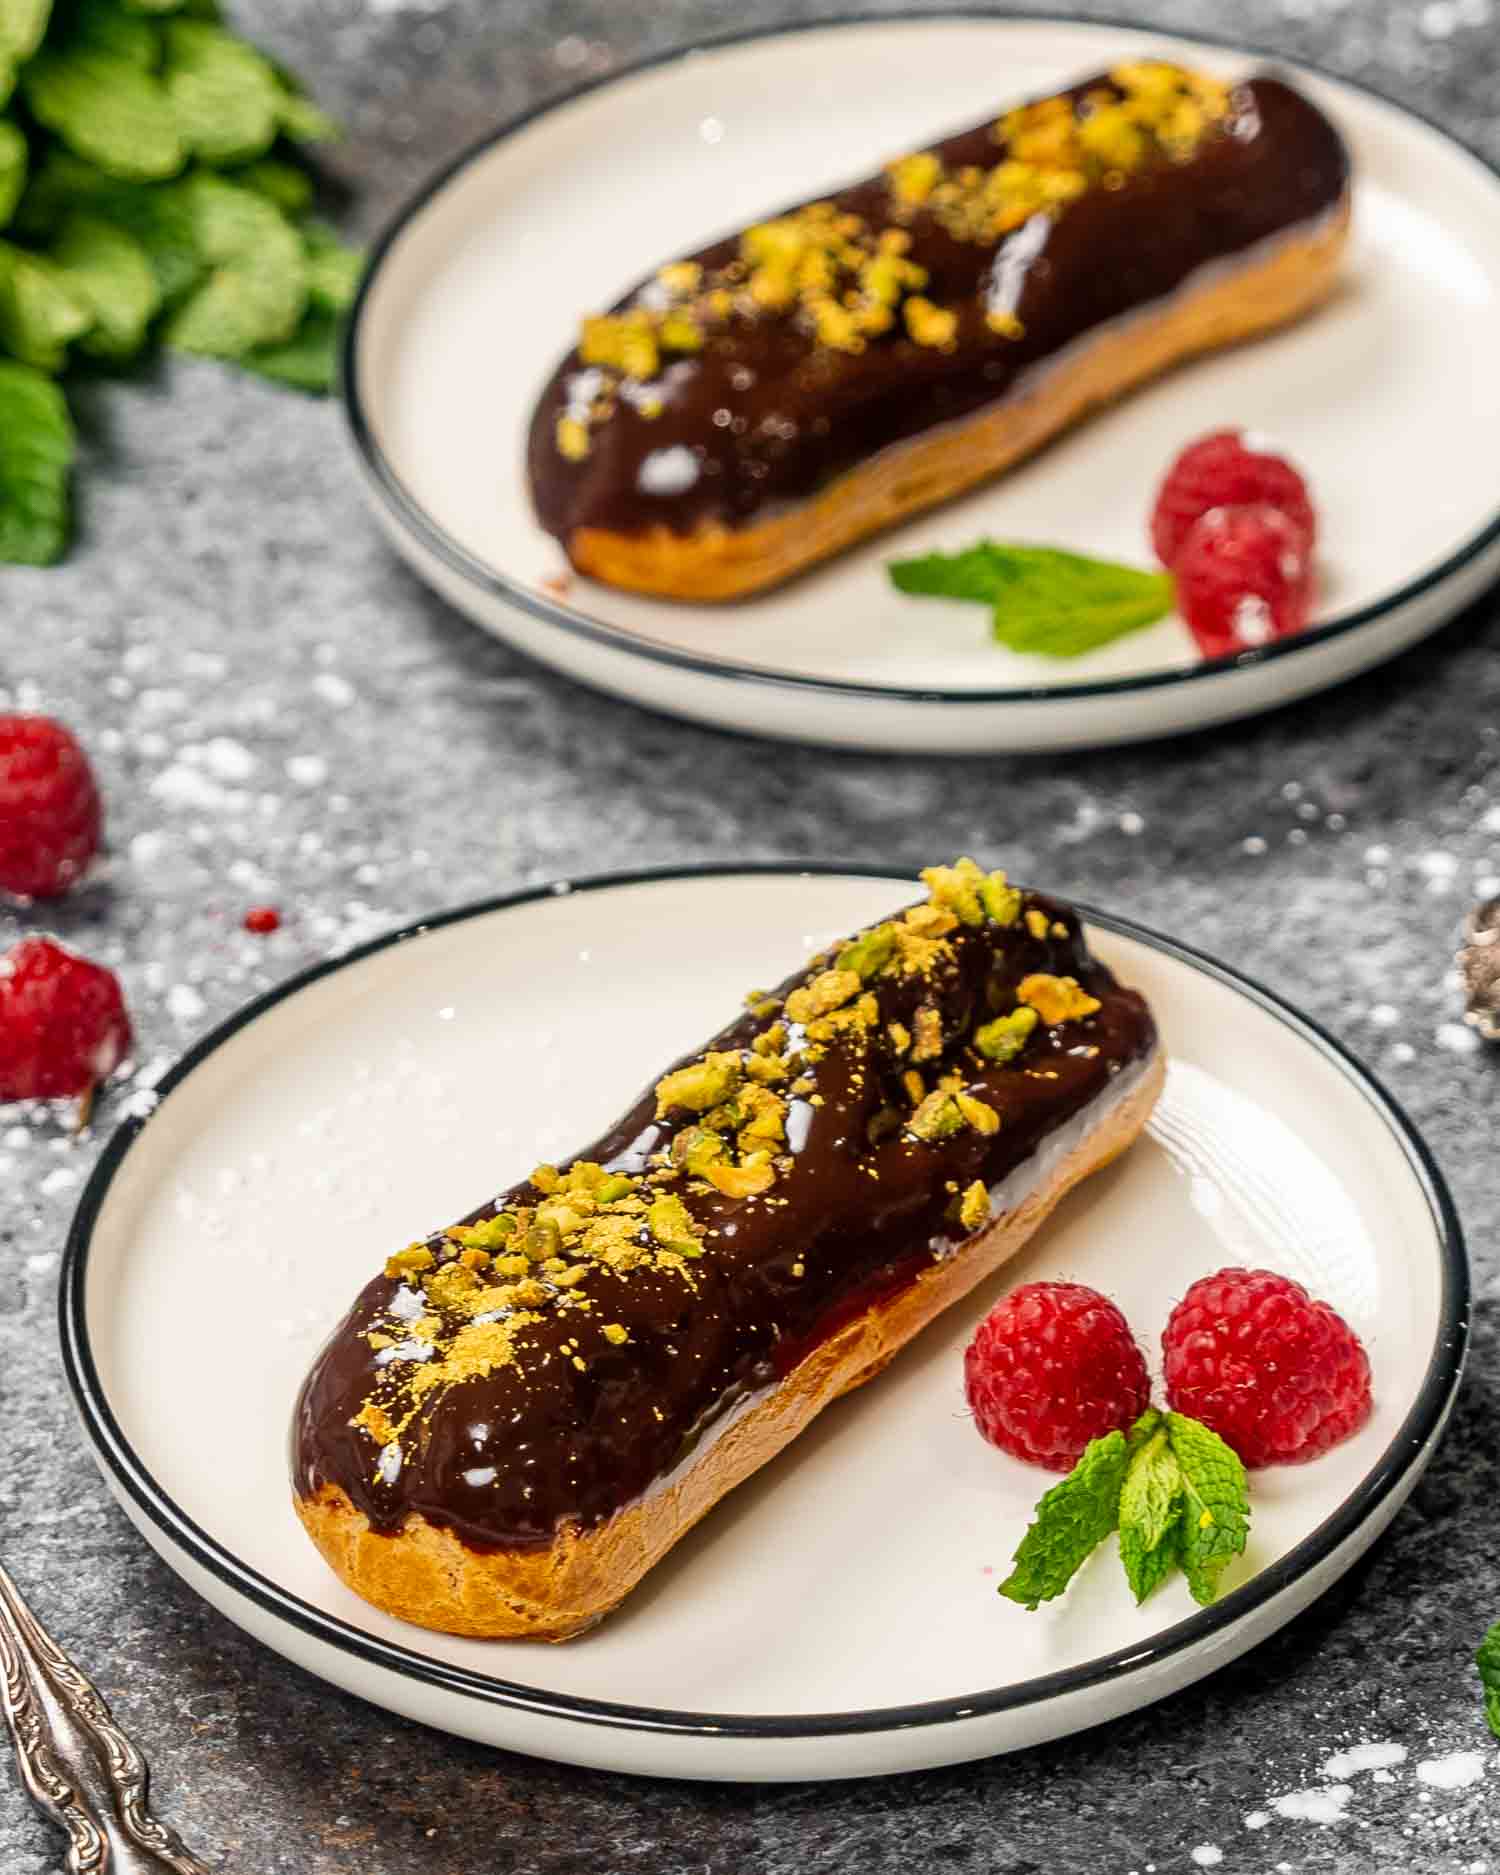 an eclair filled with pastry cream and dipped in chocolate and topped with pistachios.